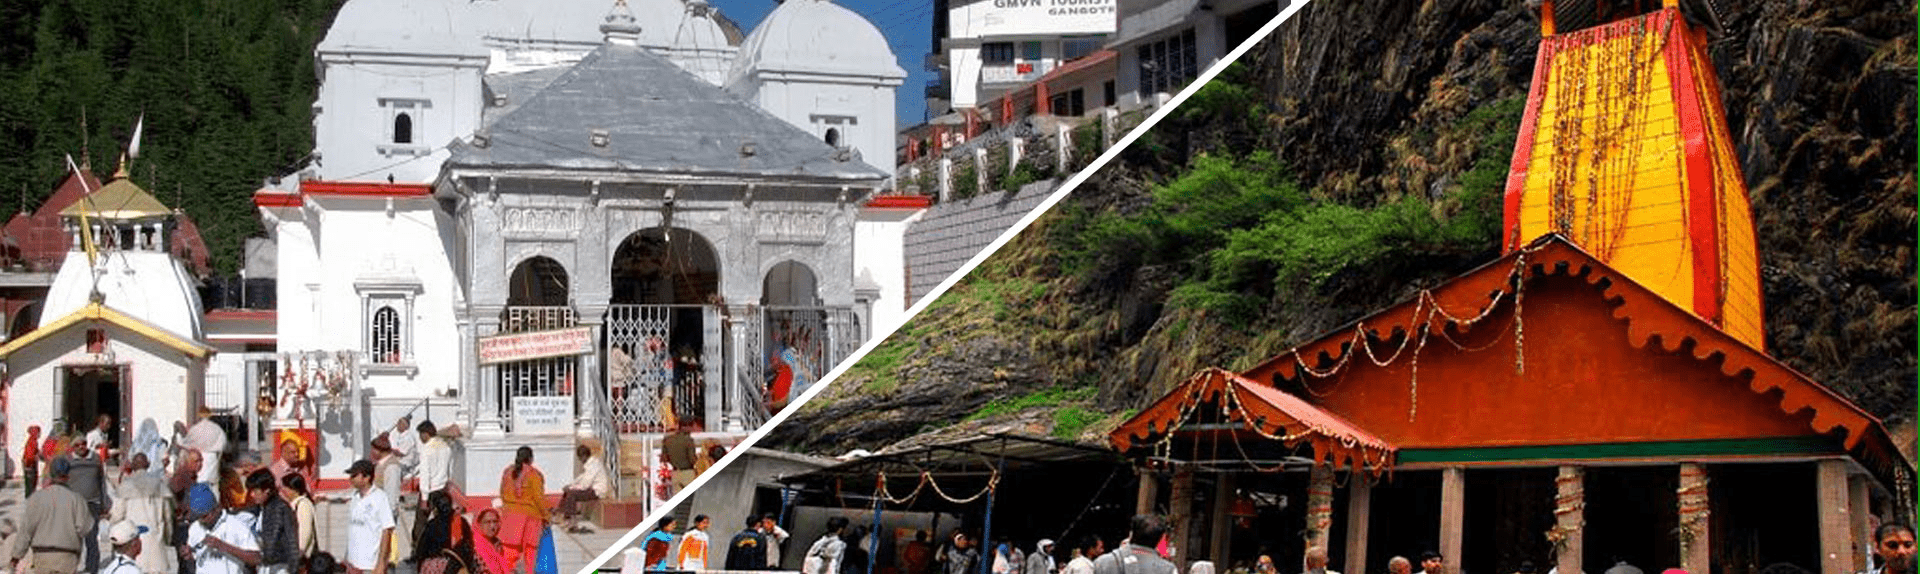 Yamunotri temple and Gangotri temple visited by devotees on Do Dham Yatra in Uttarakhand